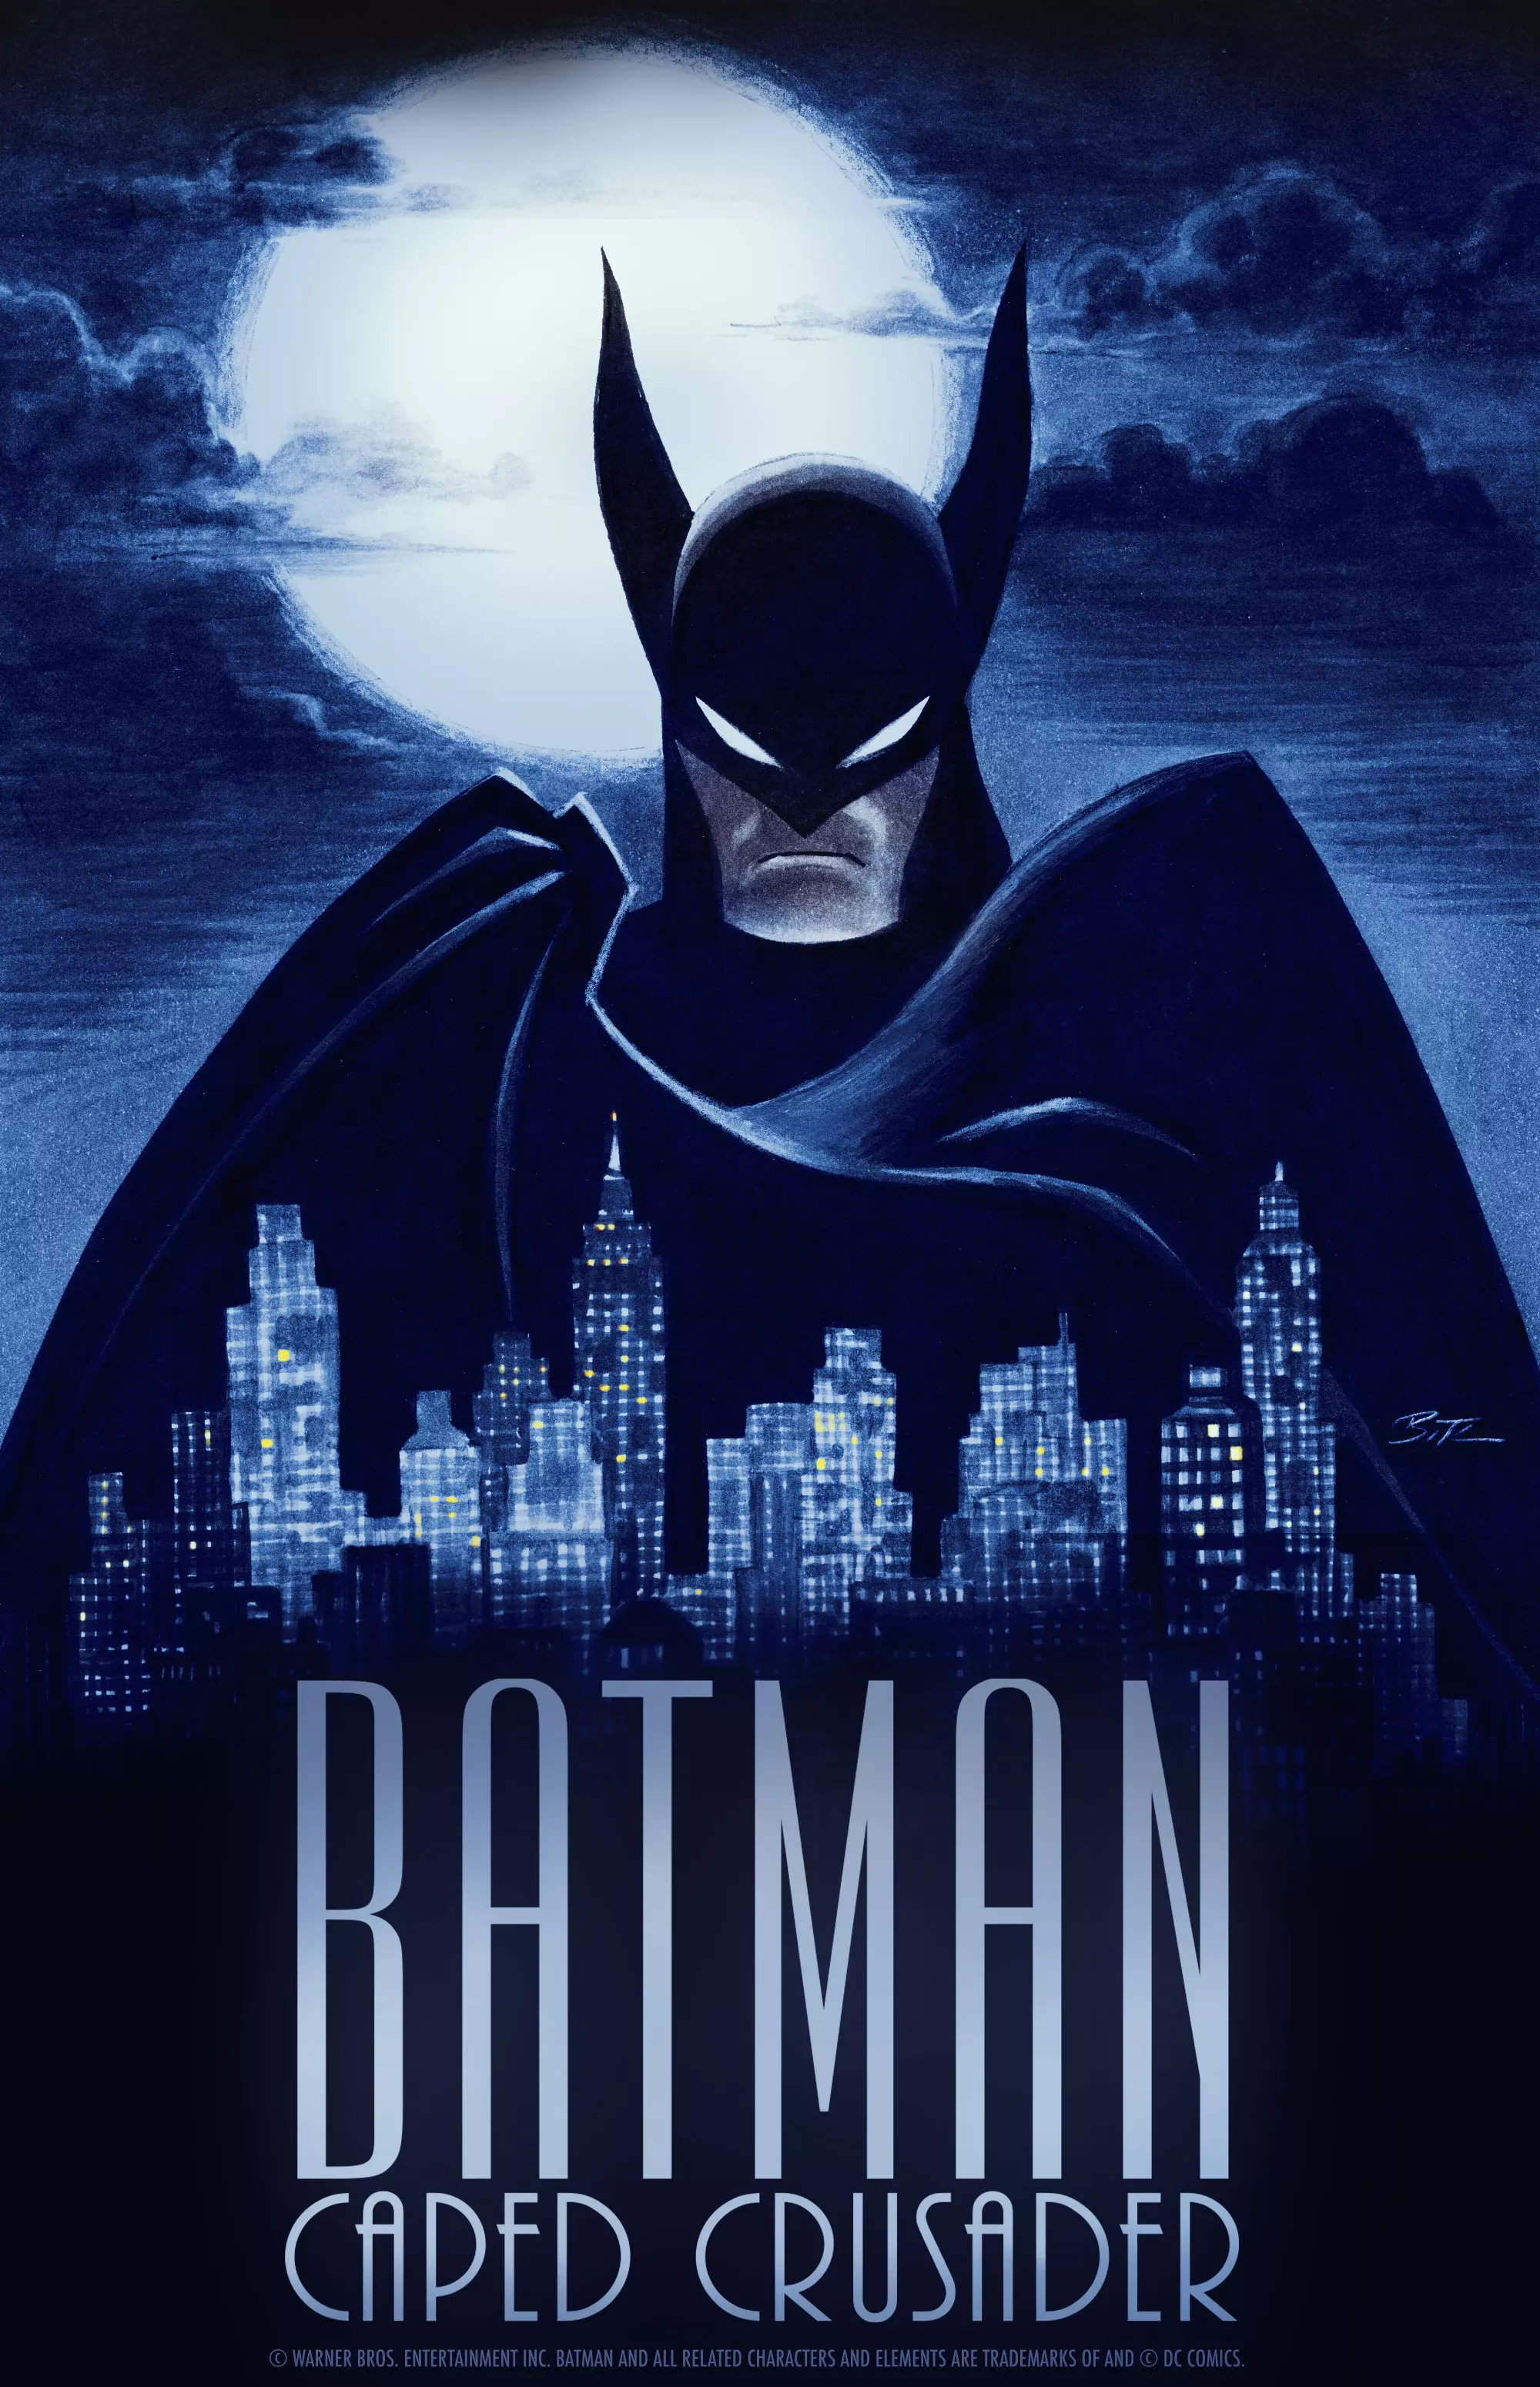 A New 'Batman' Animated Series Is Coming From . Abrams